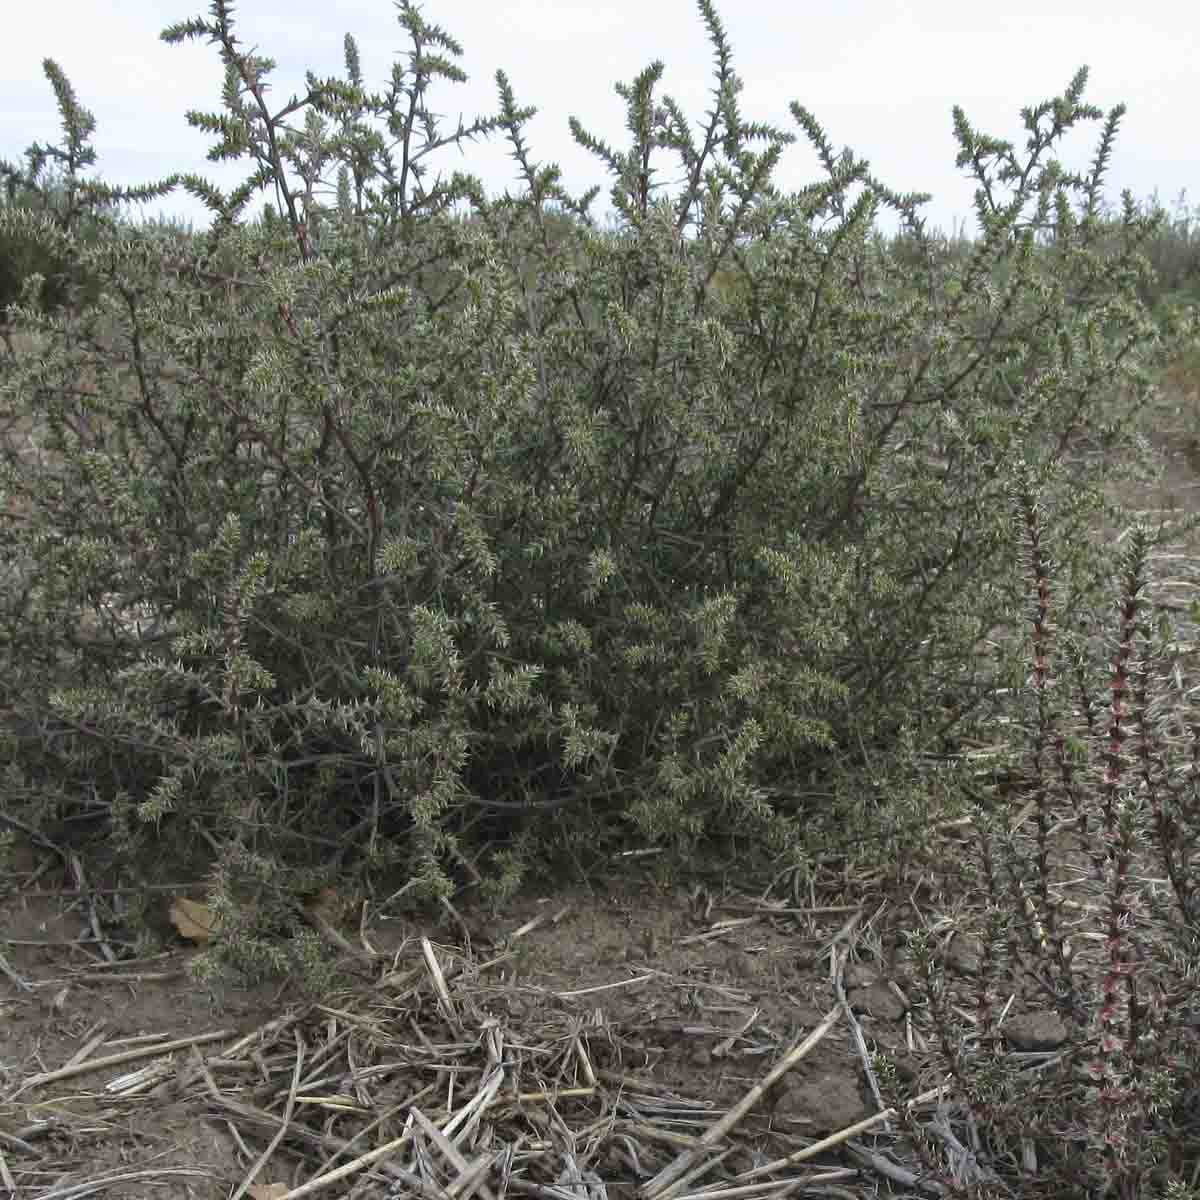 Russian thistle courtesy from Drew Lyon at WSU